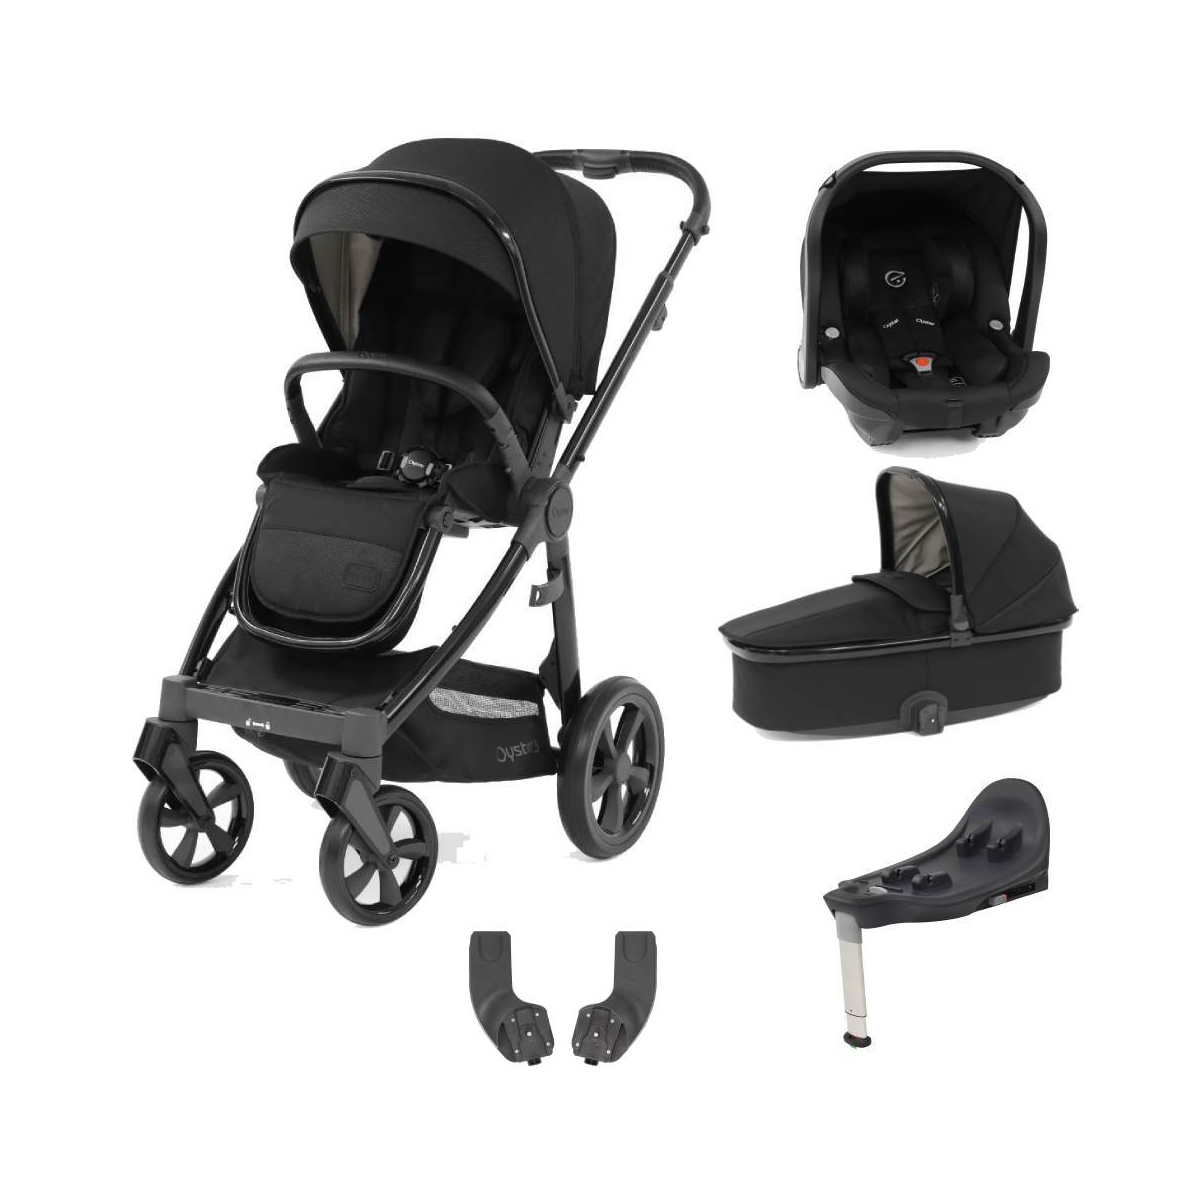 BabyStyle Oyster 3 Gloss Black Chassis Essential Capsule Travel System